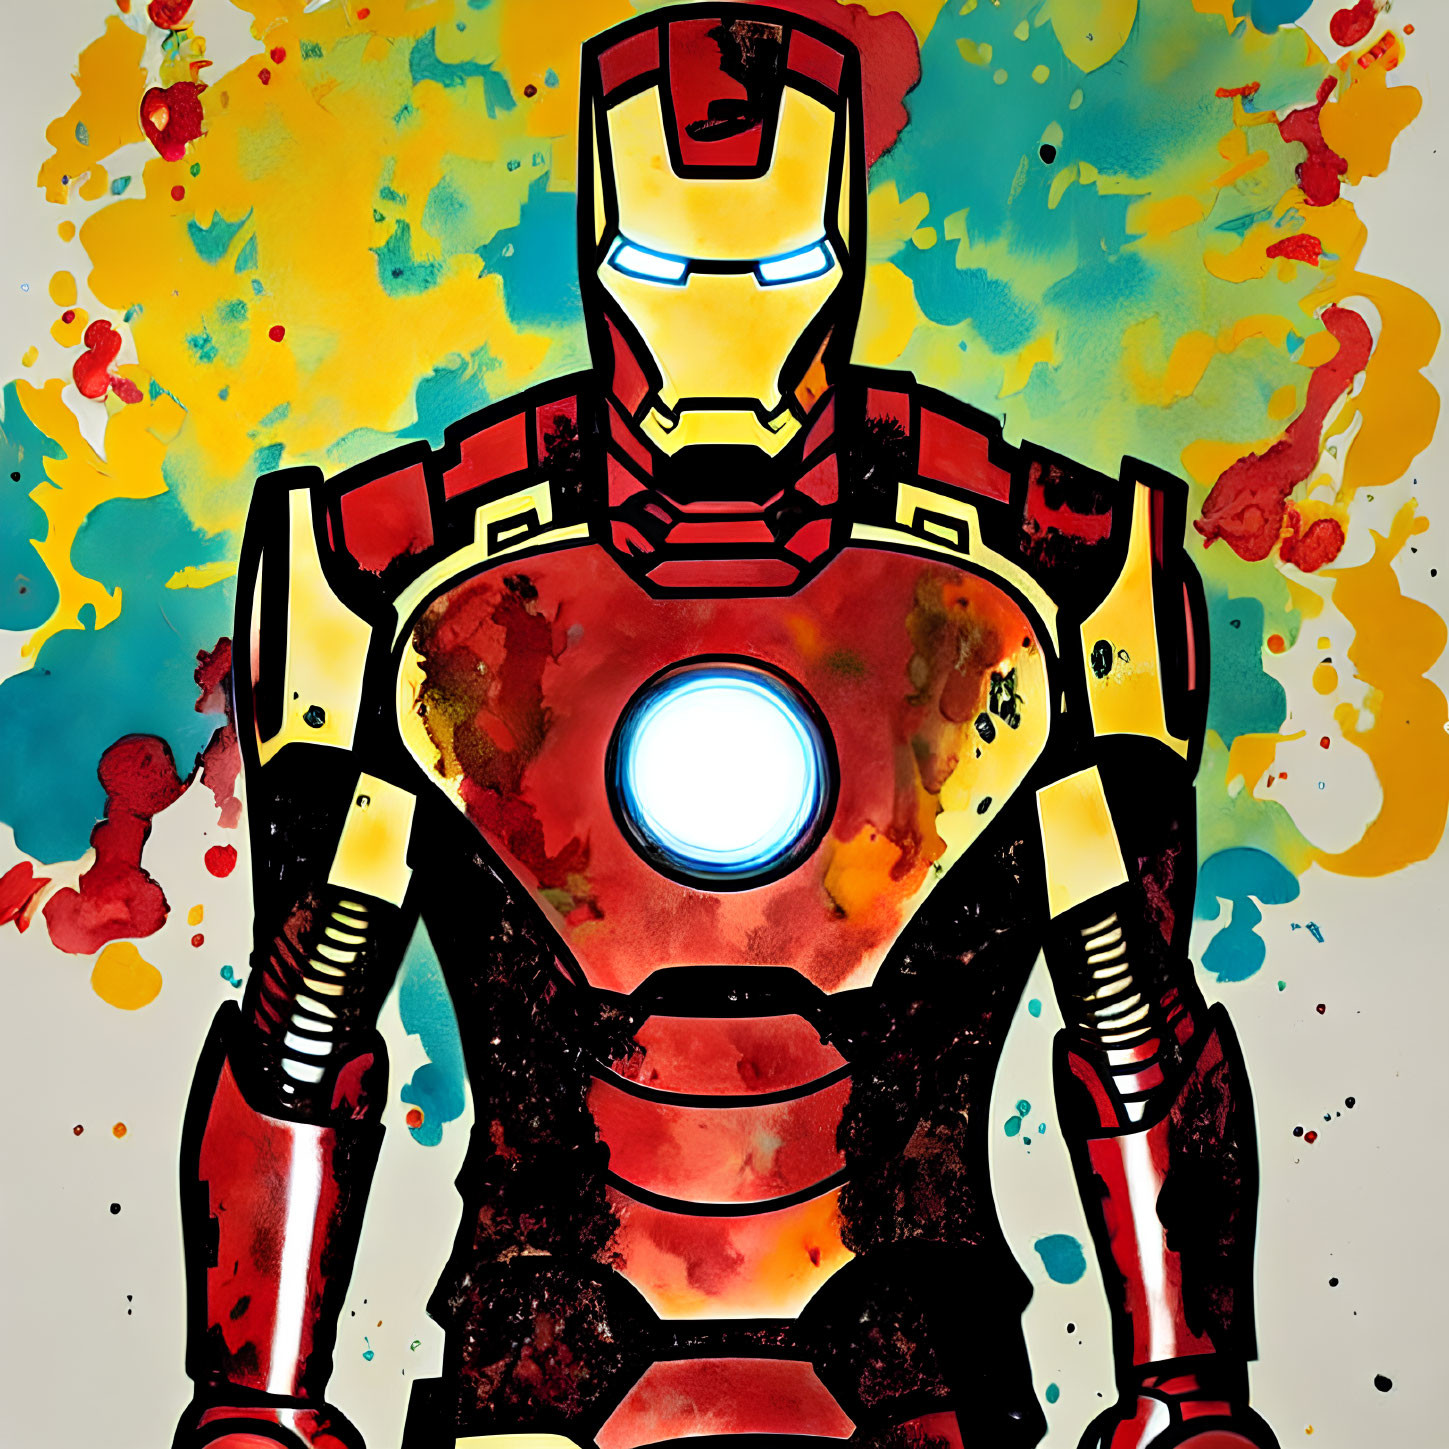 Vibrant Iron Man artwork with splattered paint background and chest reactor focus